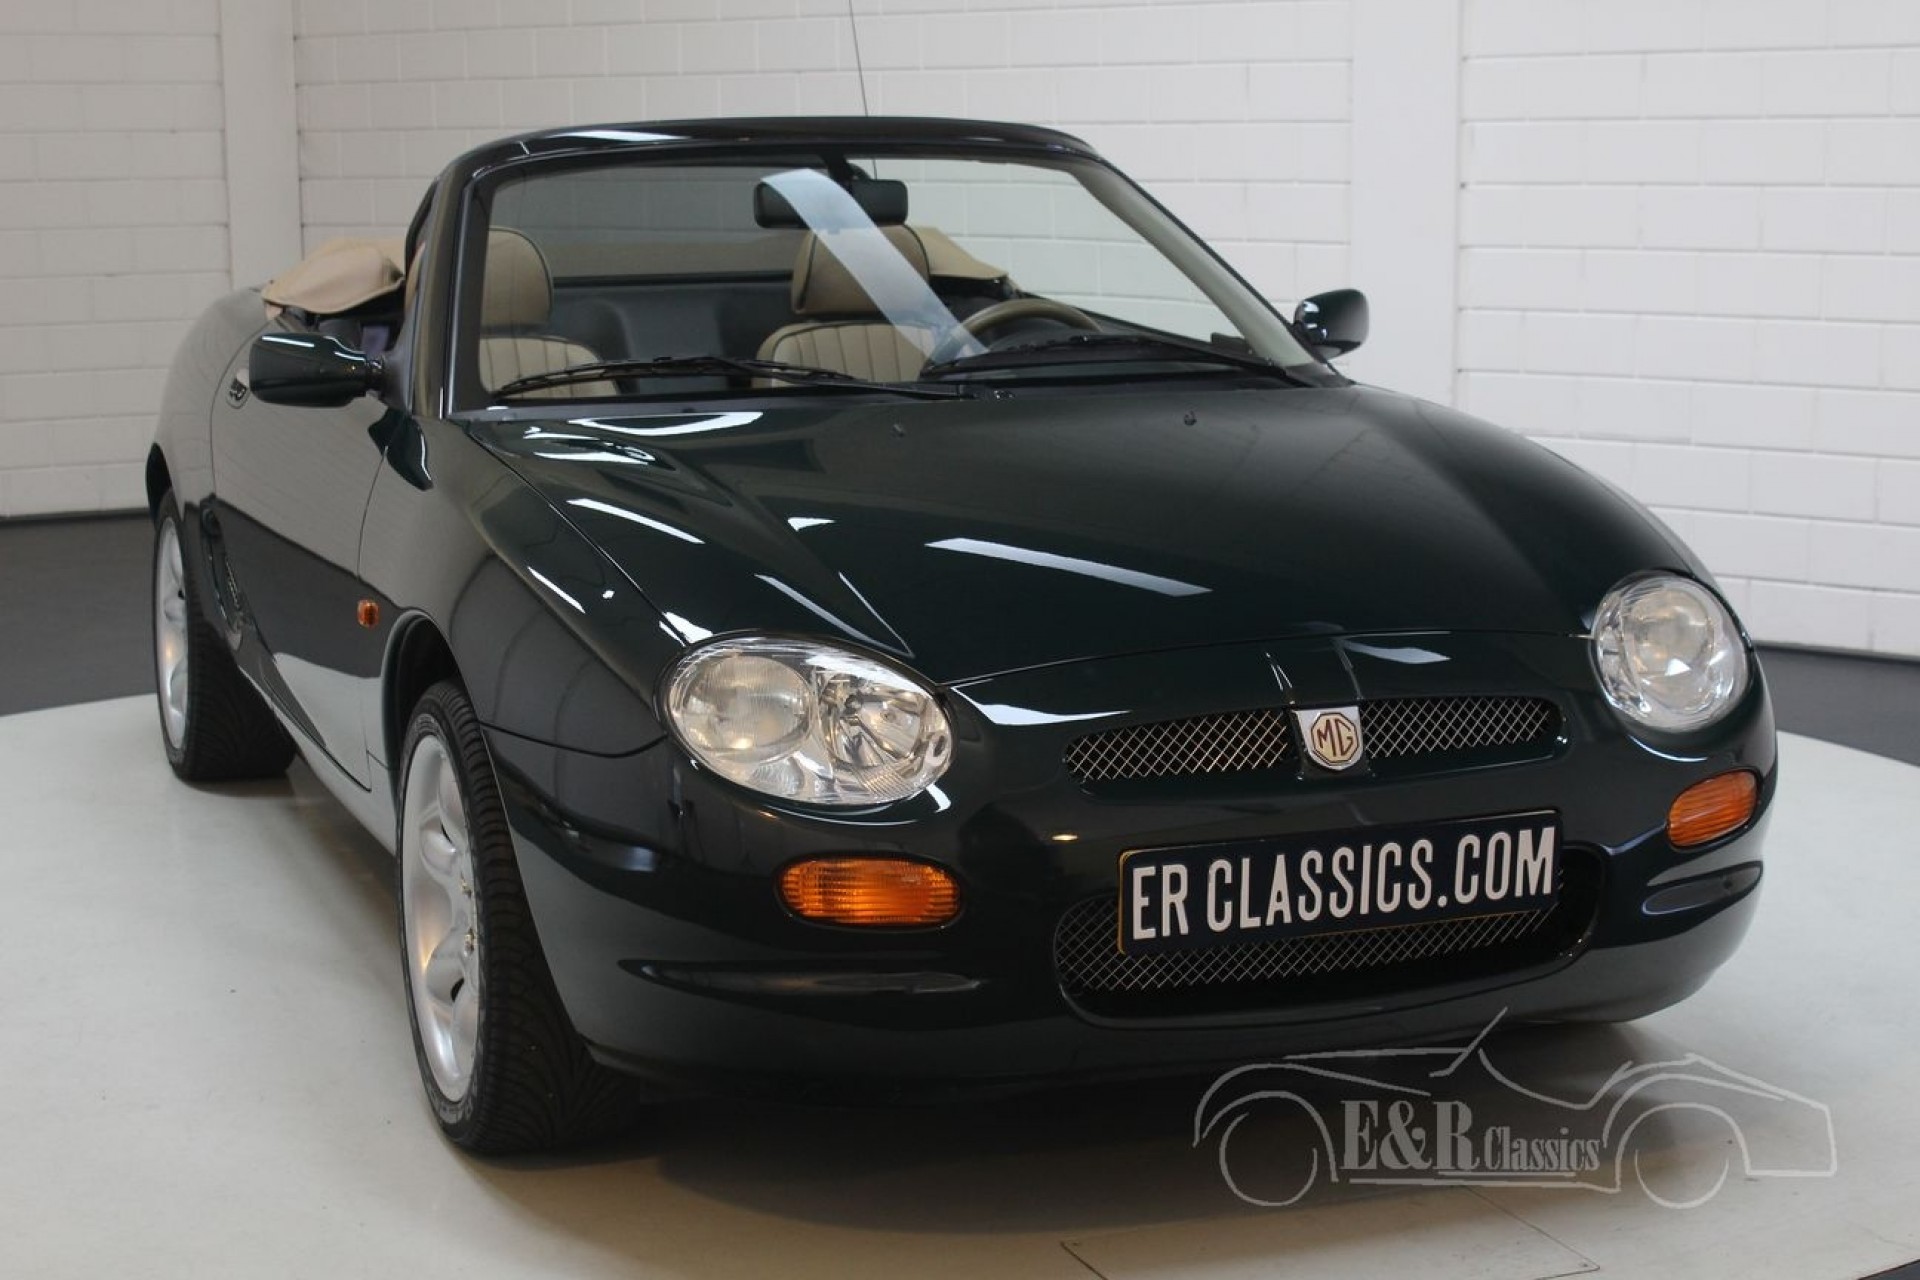 Mg Mgf 1 8 Roadster 1998 For Sale At Erclassics